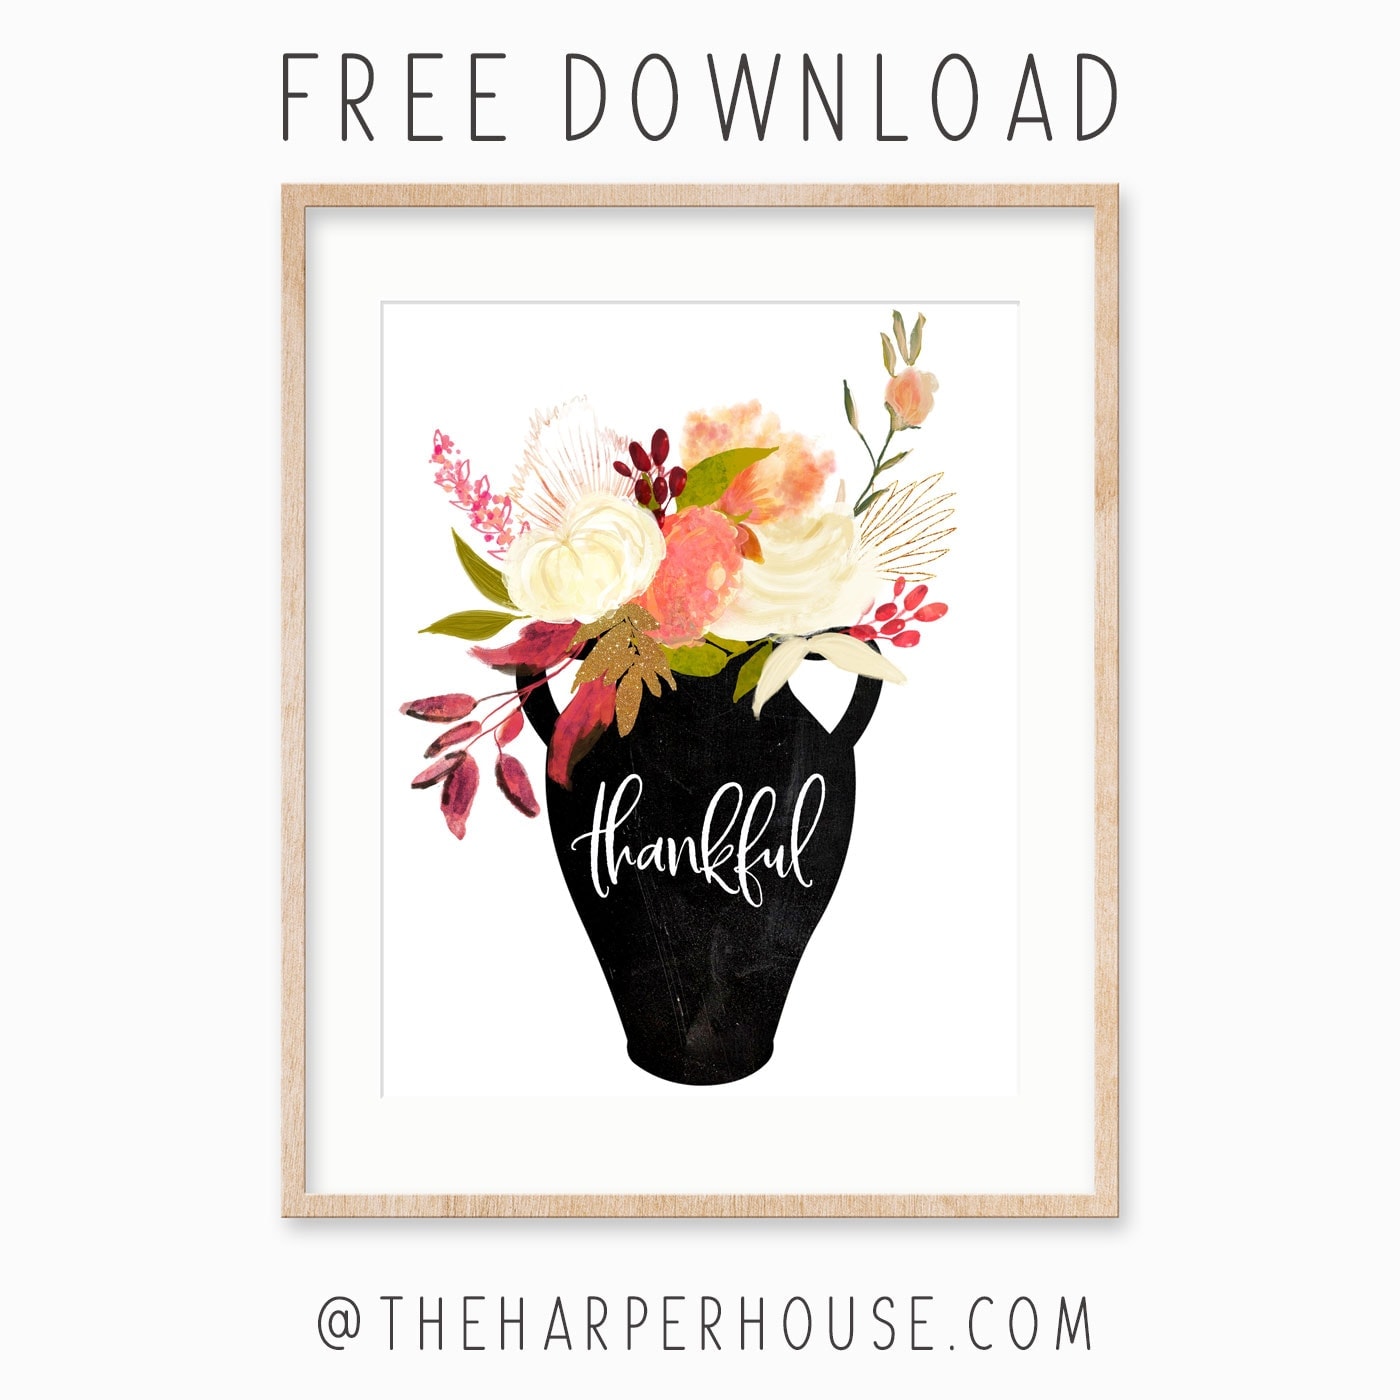 Free Thankful Grateful Blessed floral printables. Perfect for fall decorating and cheap easy wall art! #printable #freeprintable #falldecor